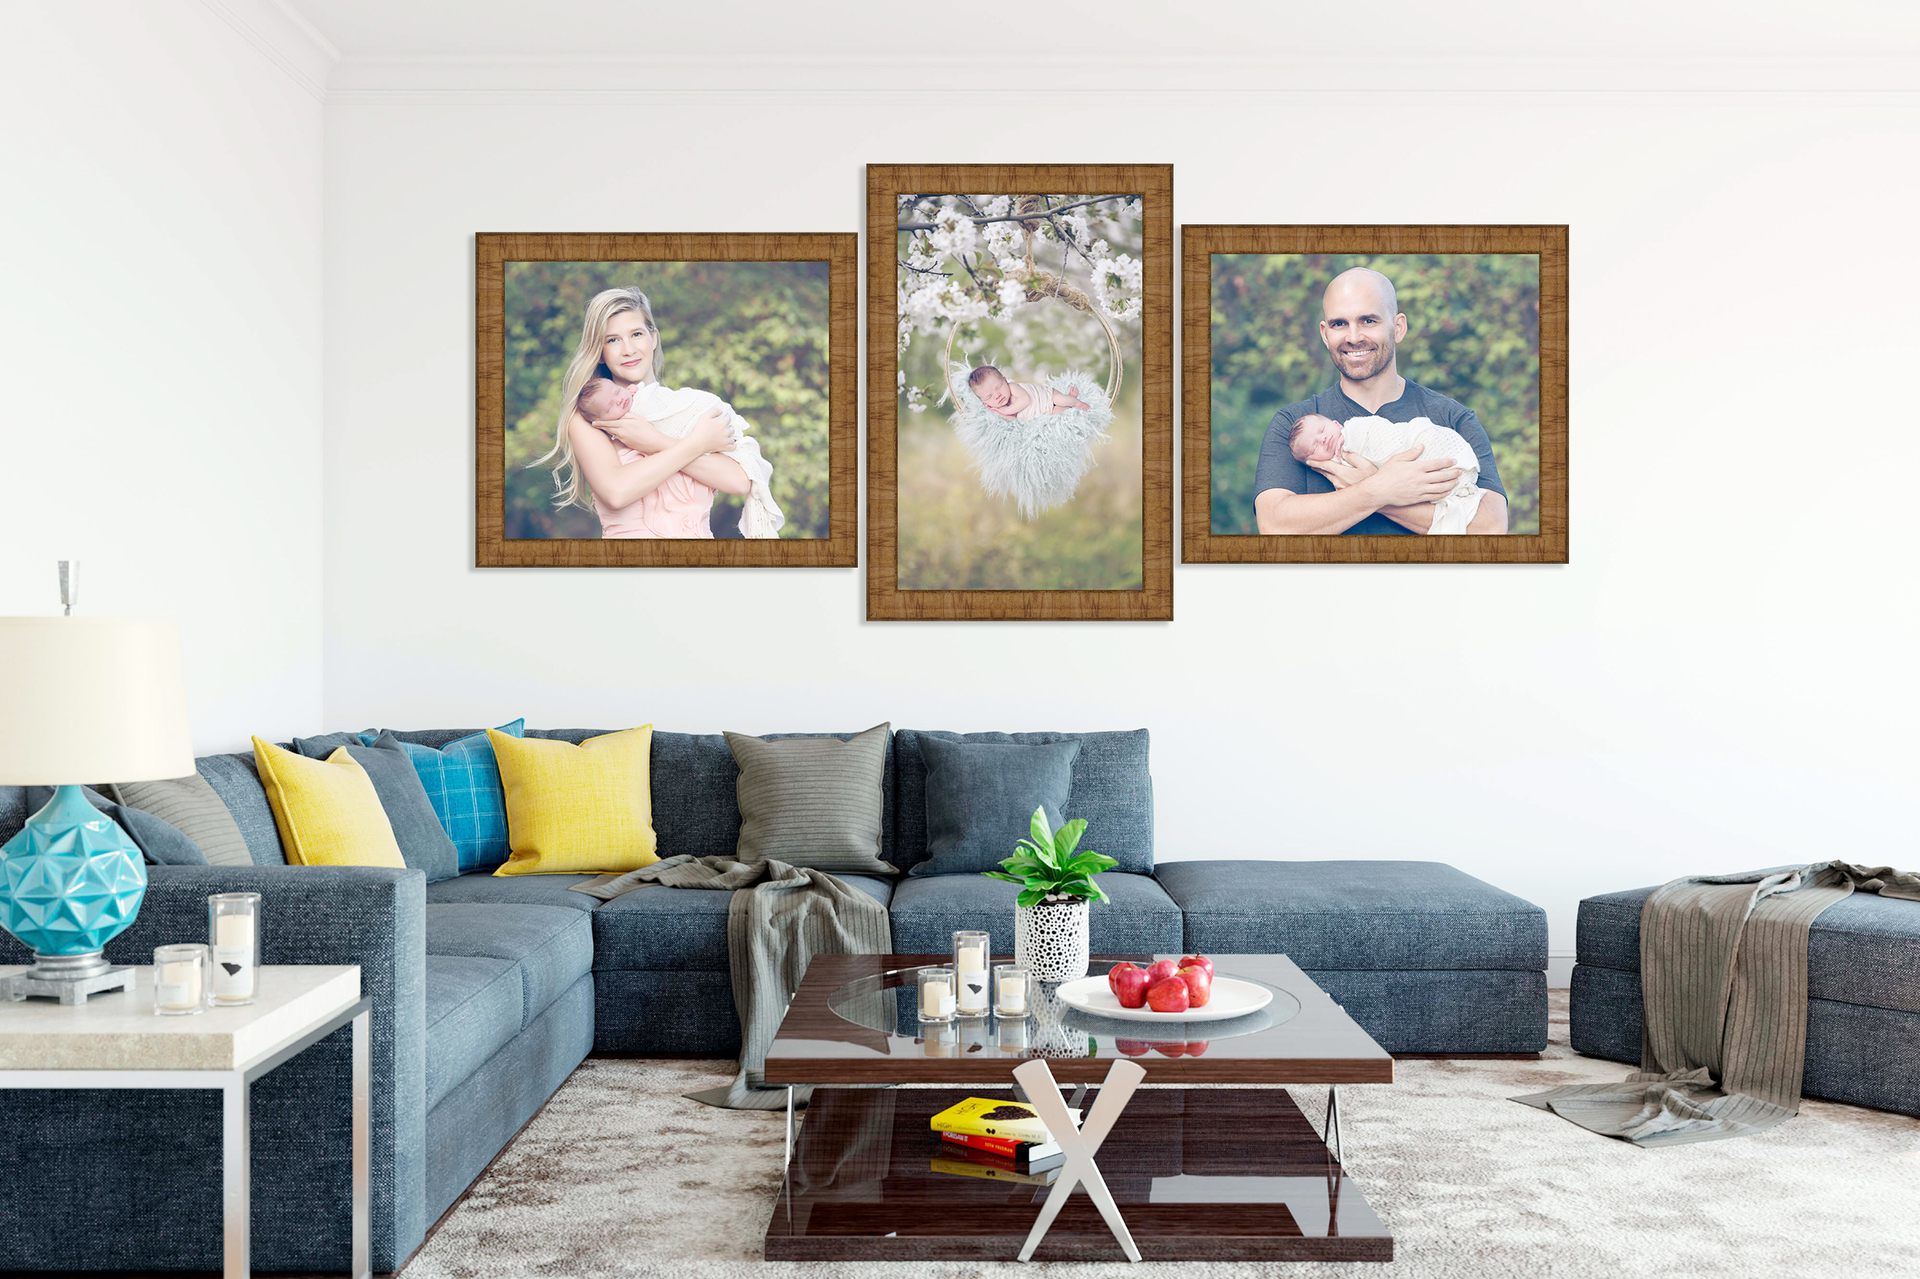 Livingroom showing three pieces of wall art. Outdoors photos taken at Gaby Clark Photography. Newborn in the middle, mom and newborn on the left, dad and newborn on the right.